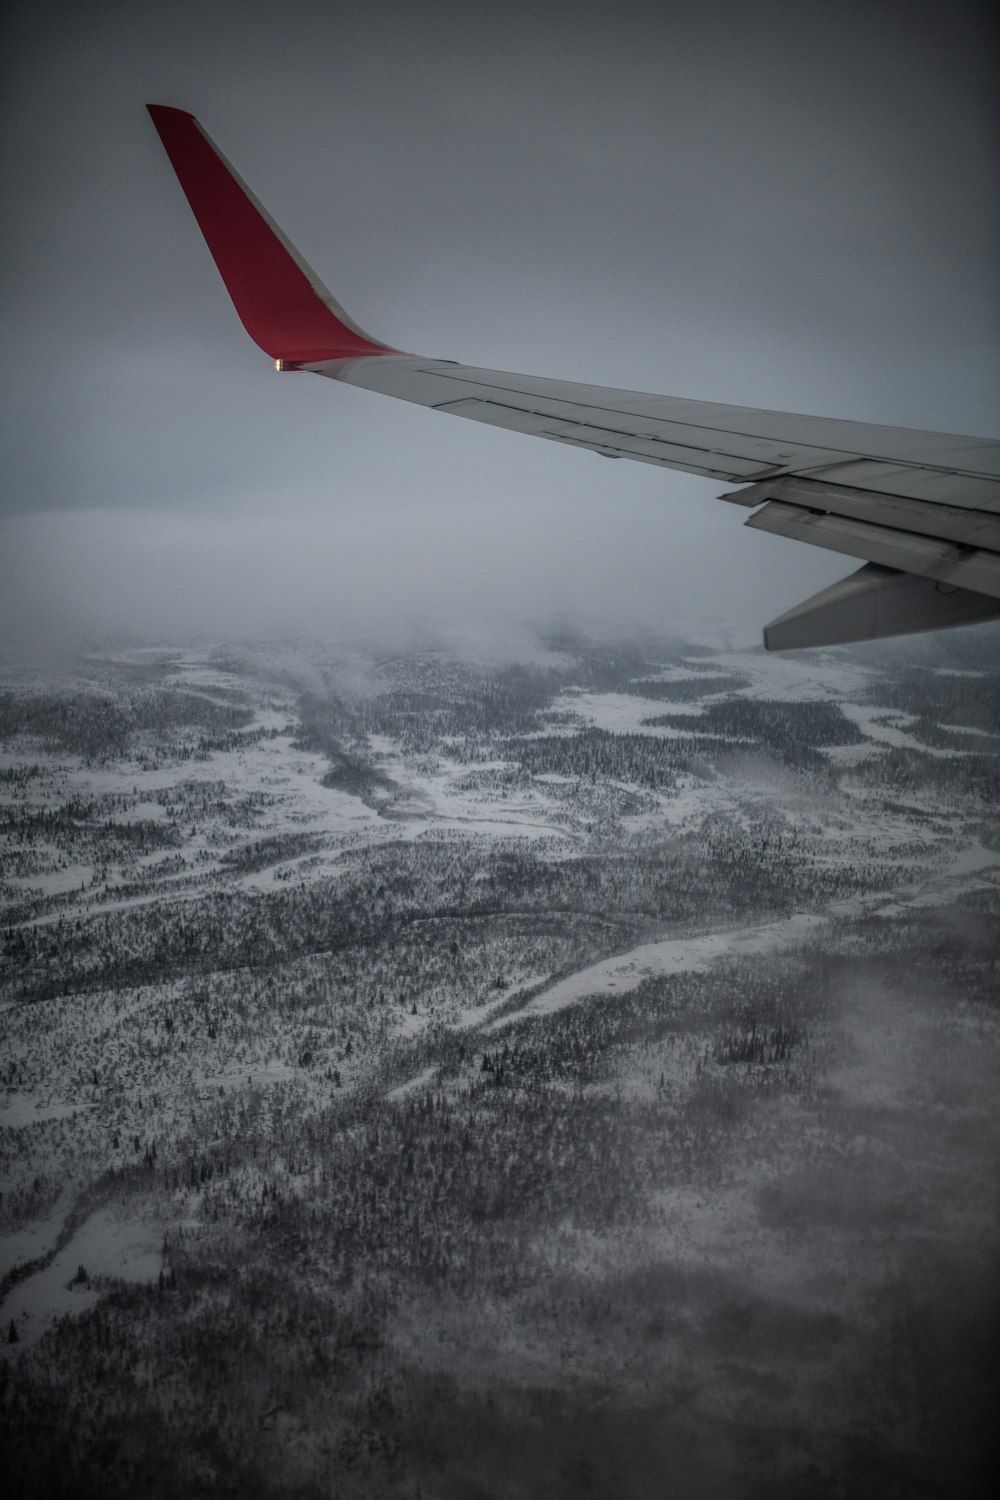 the wing of an airplane flying over a snowy landscape